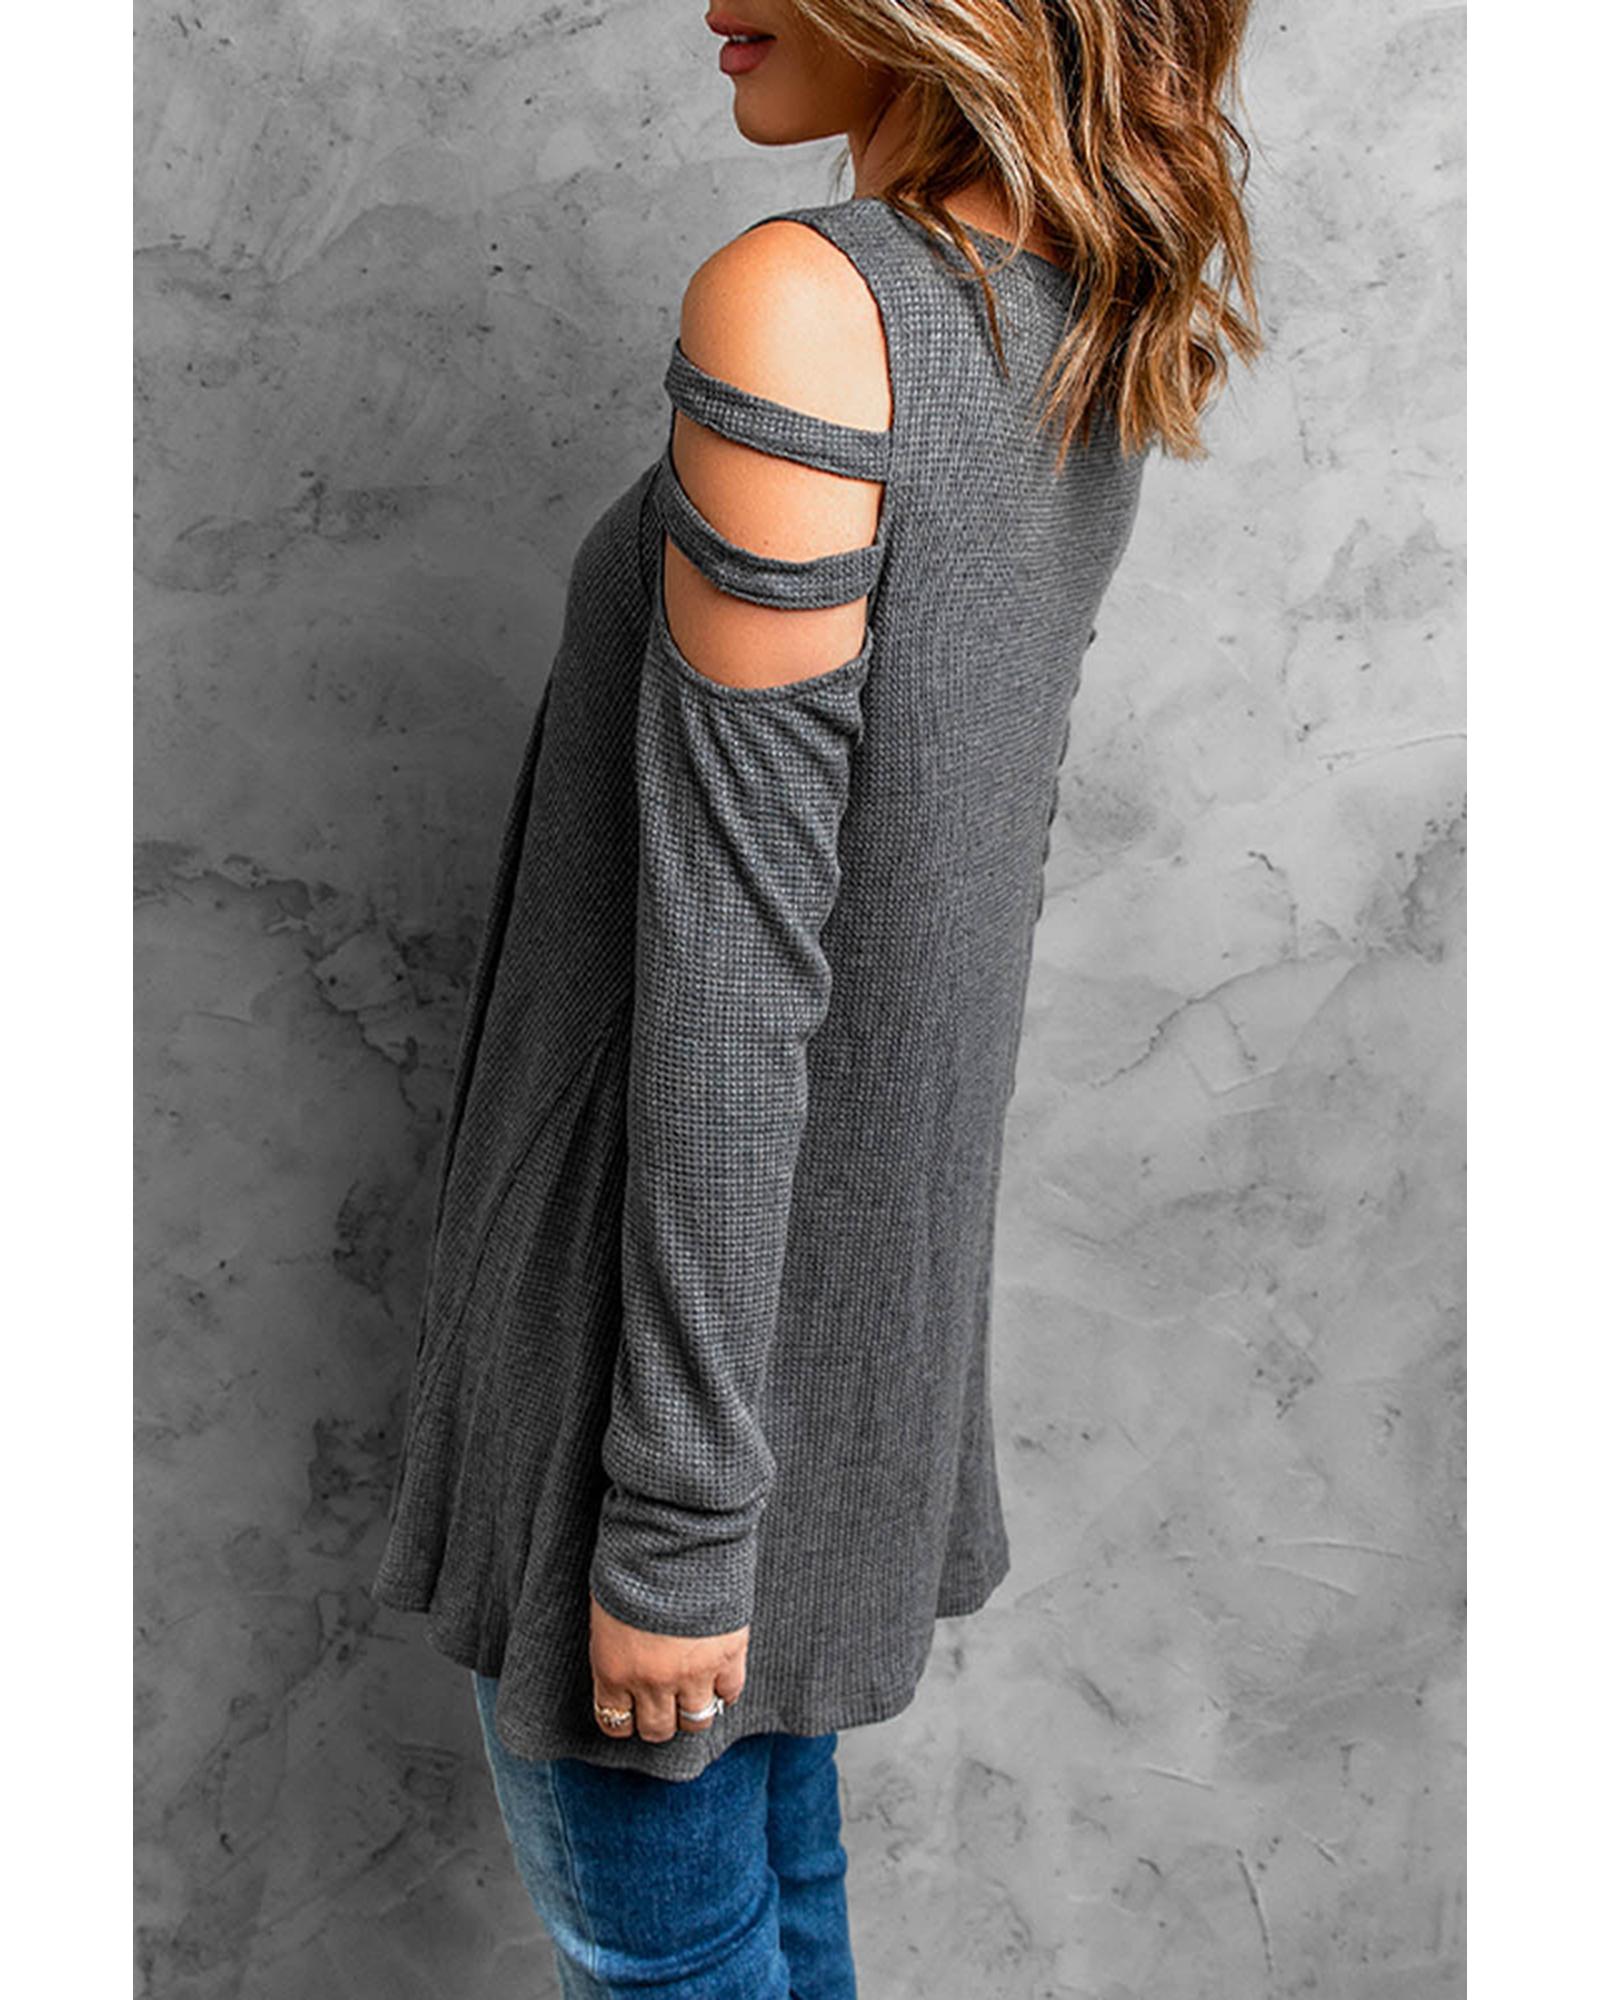 Cut-out Waffle Knit Long Sleeve Top - L